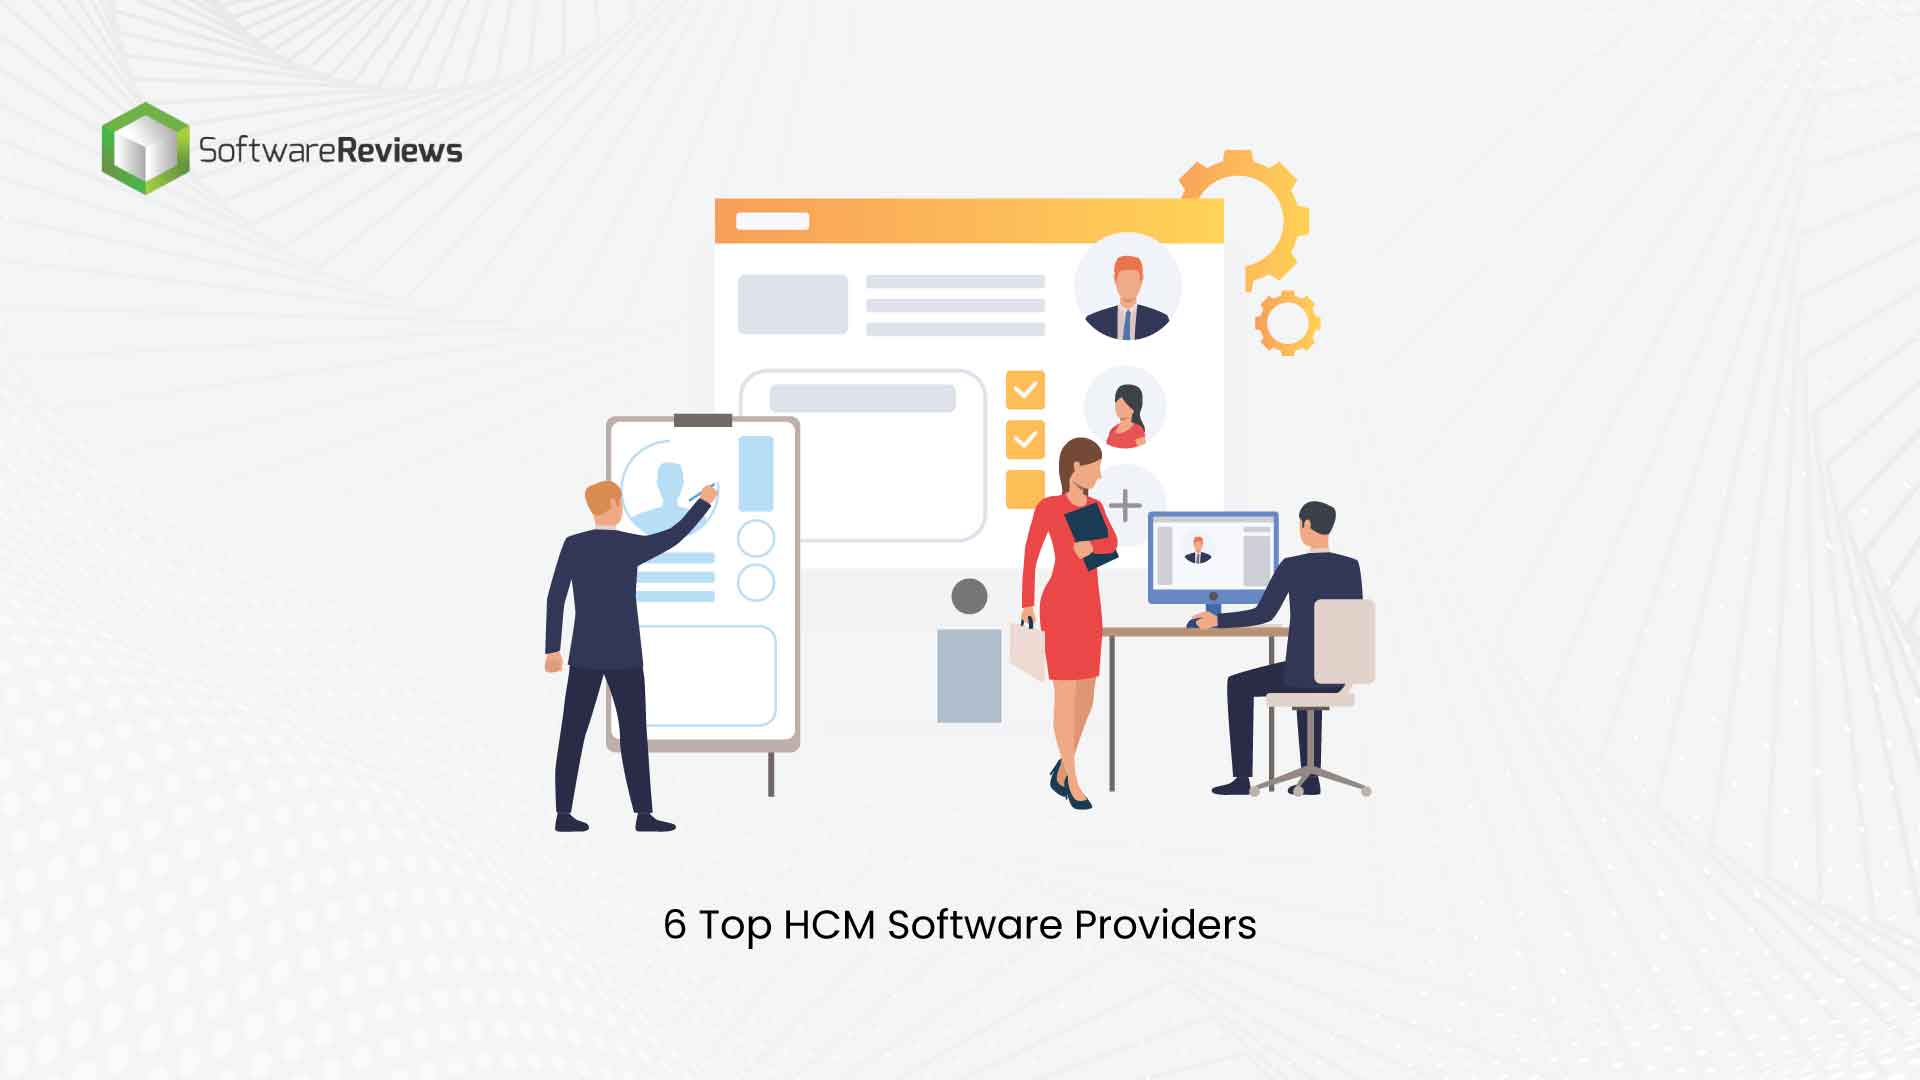 These Six Top Human Capital Management (HCM) Software Providers Will Streamline HR Initiatives This Year, SoftwareReviews Users Say